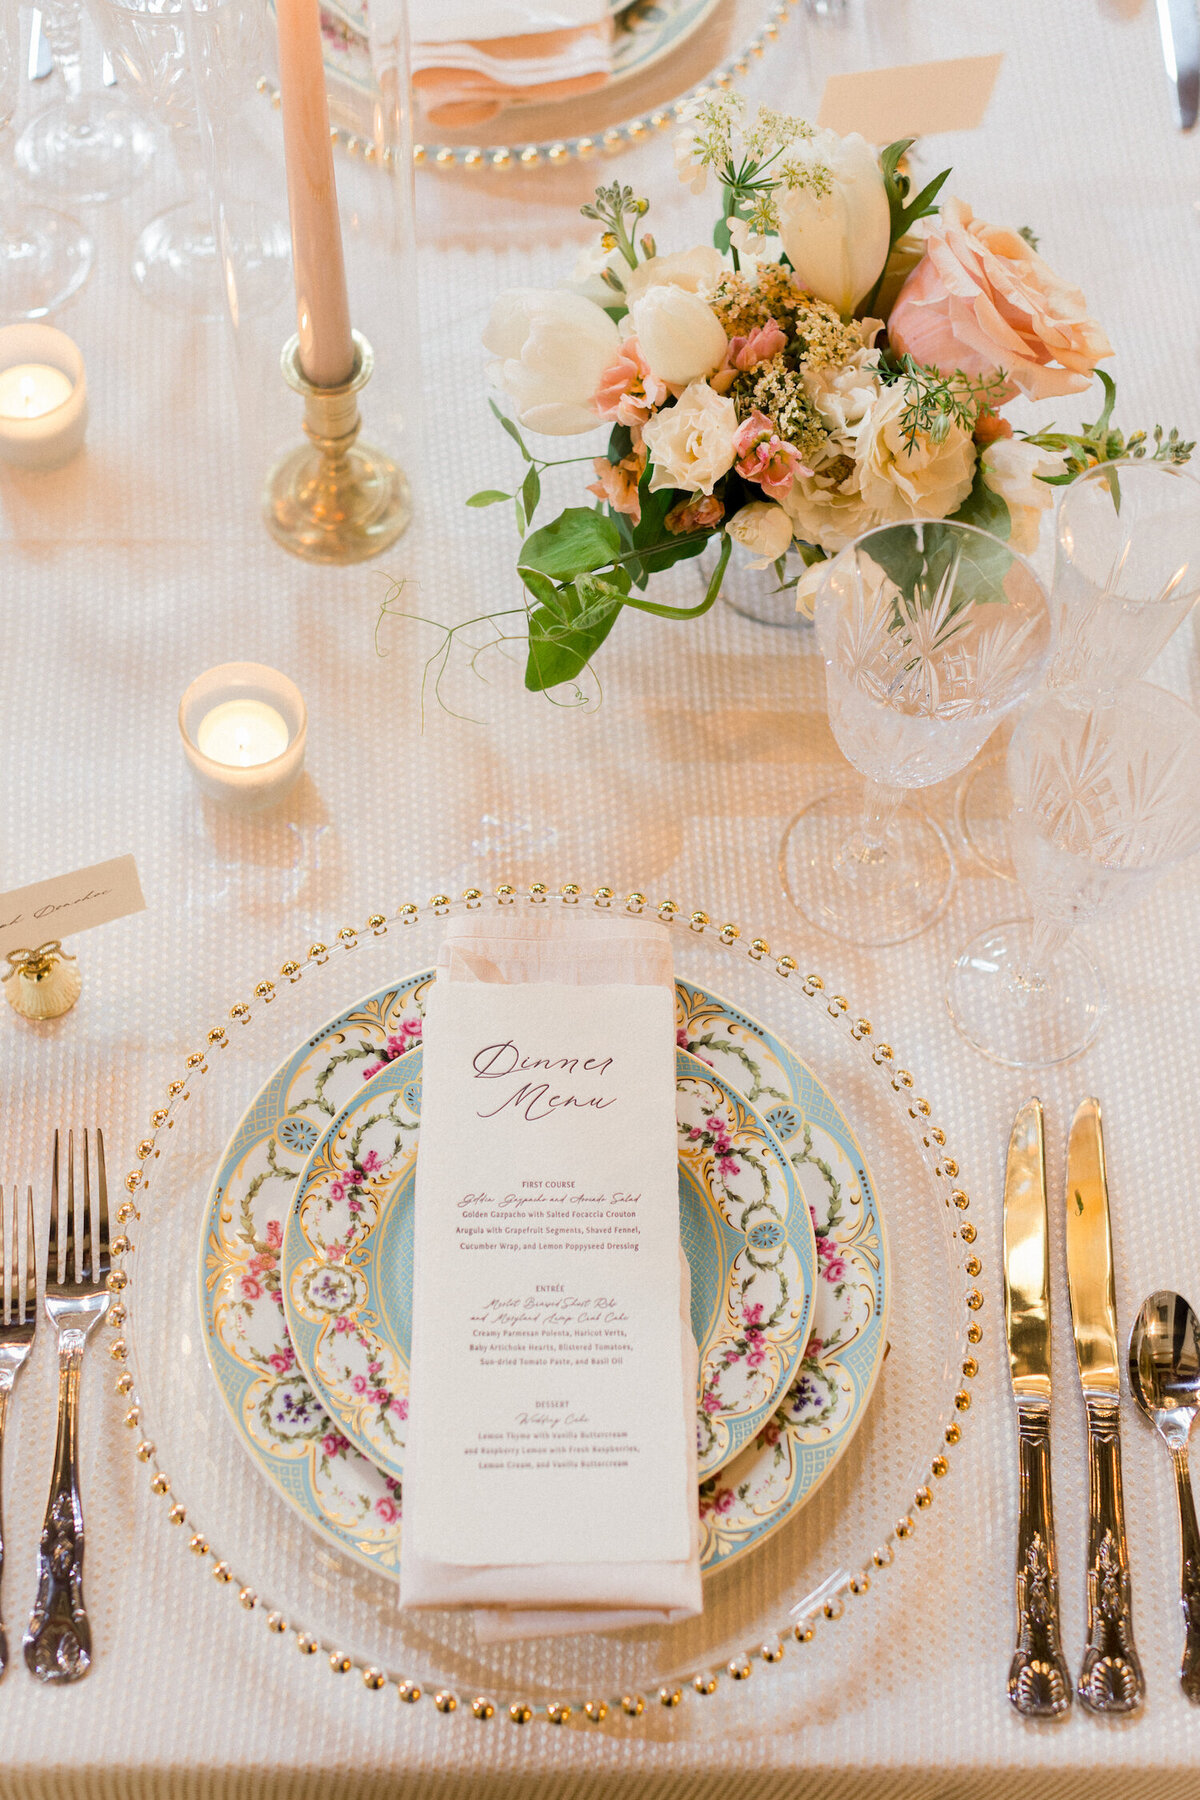 agriffin-events-dc-wedding-planner-anderson-house-abbygrace-29